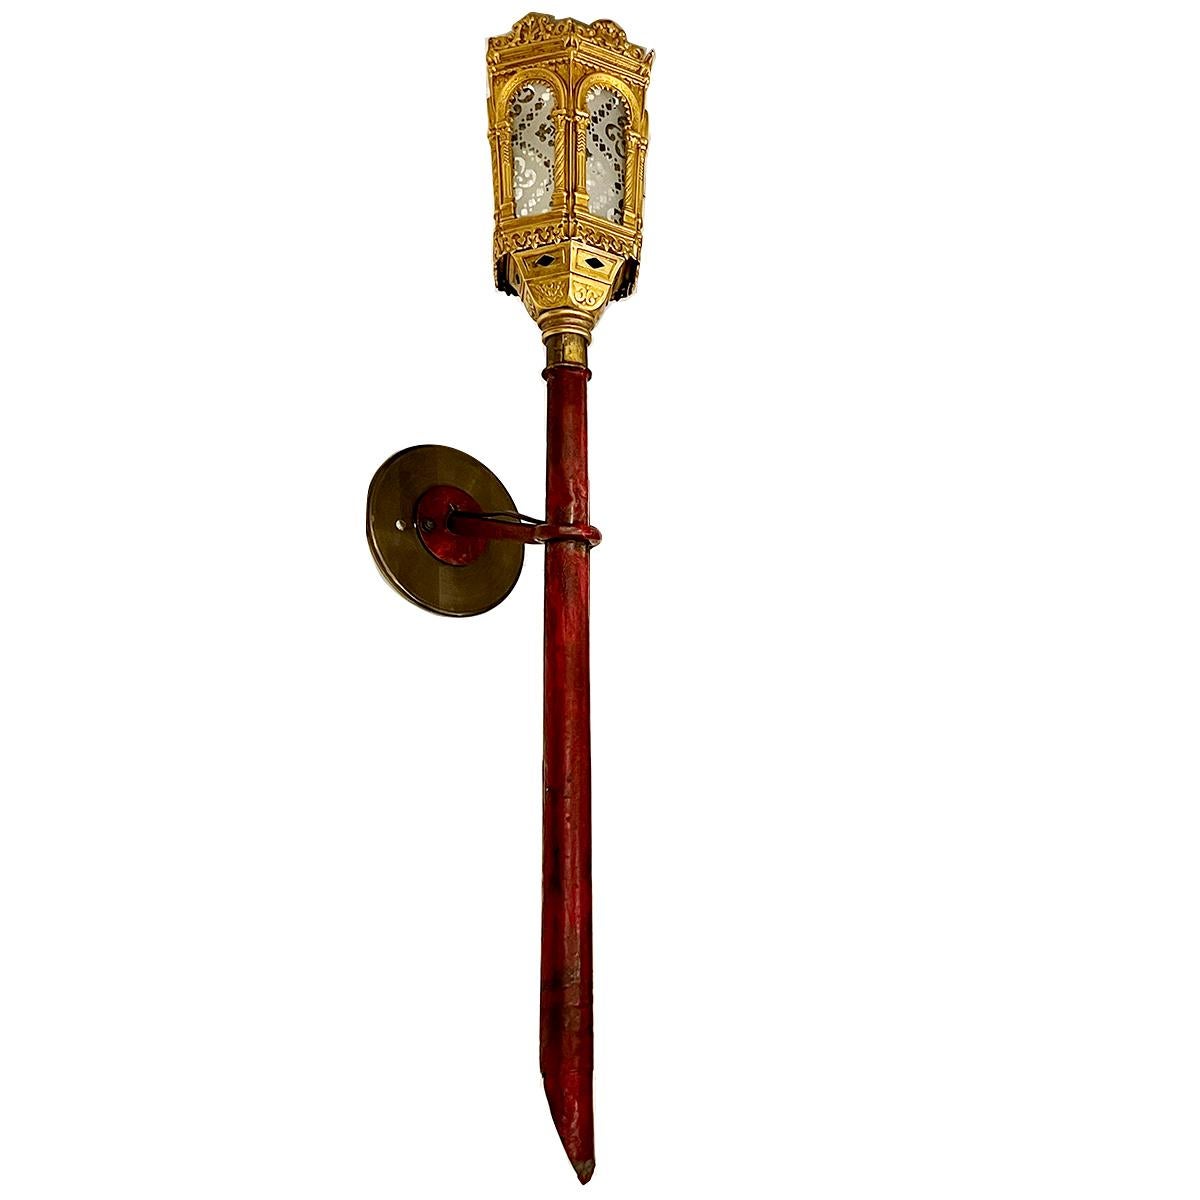 Pair of circa 1920's Venetian tole and gilt bronze torch sconces.

Measurements:
Height: 25